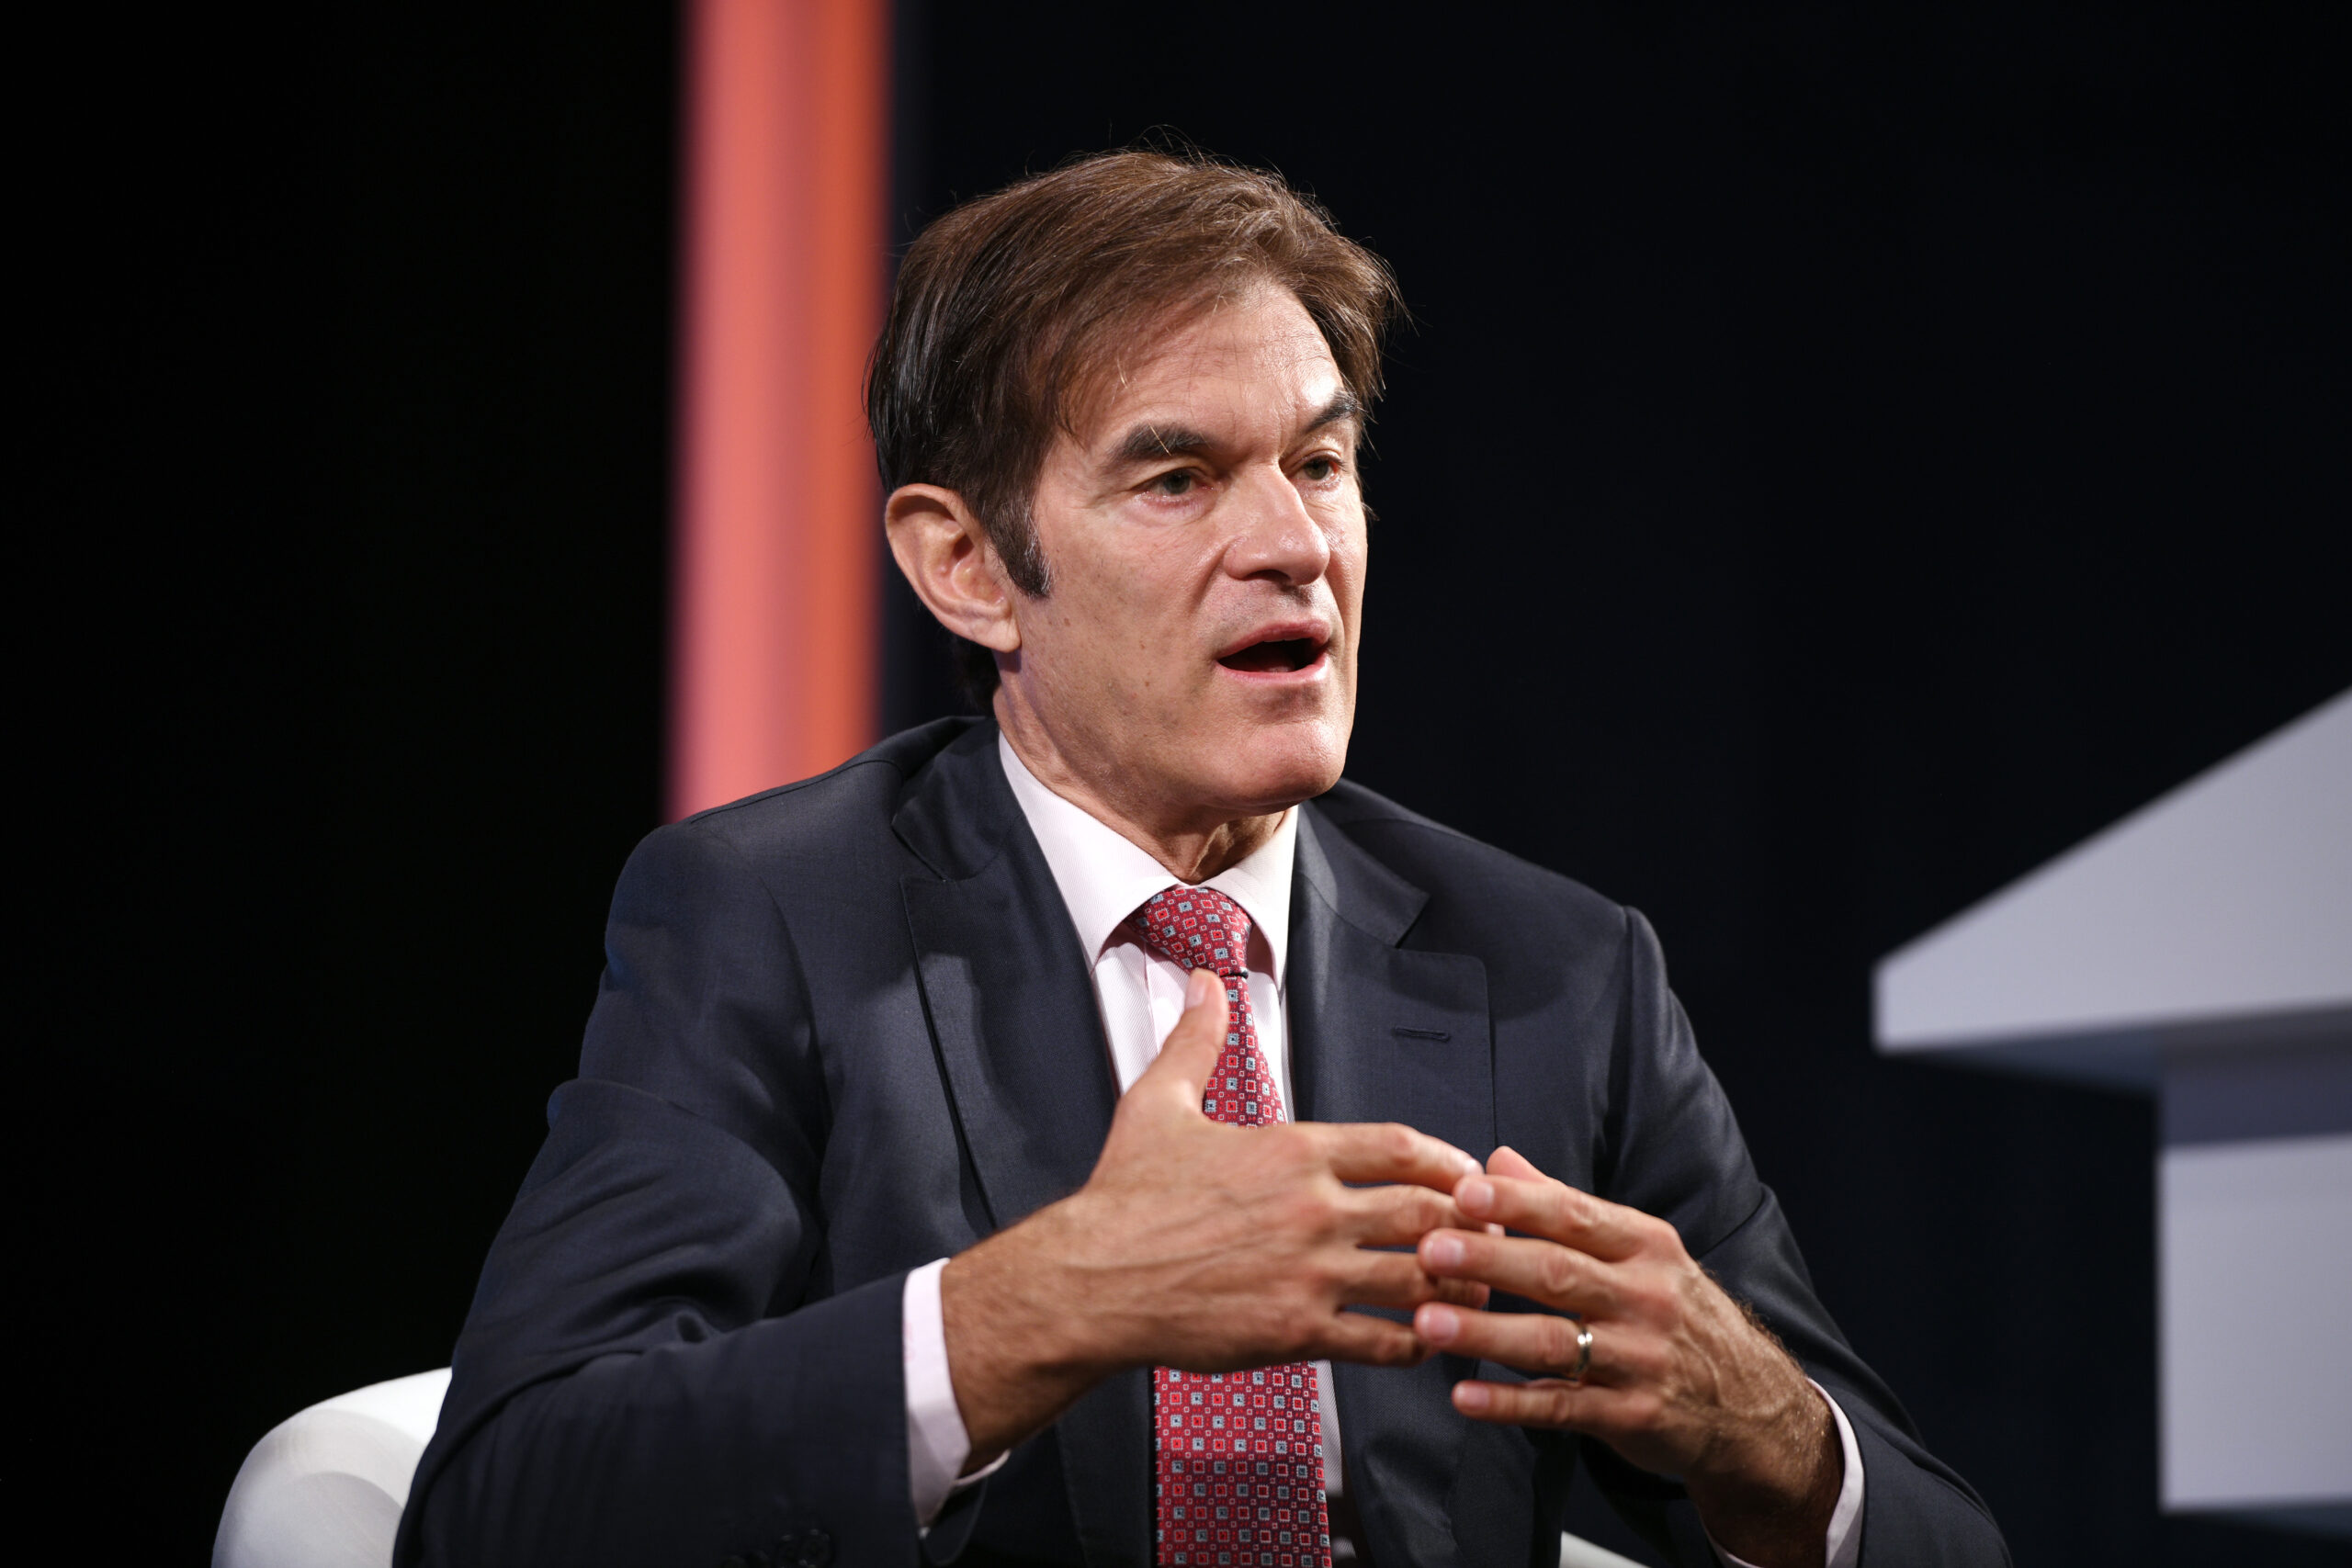 Dr. Oz Roasted For Filming Pennsylvania Campaign Ad for Senate in His New Jersey Mansion